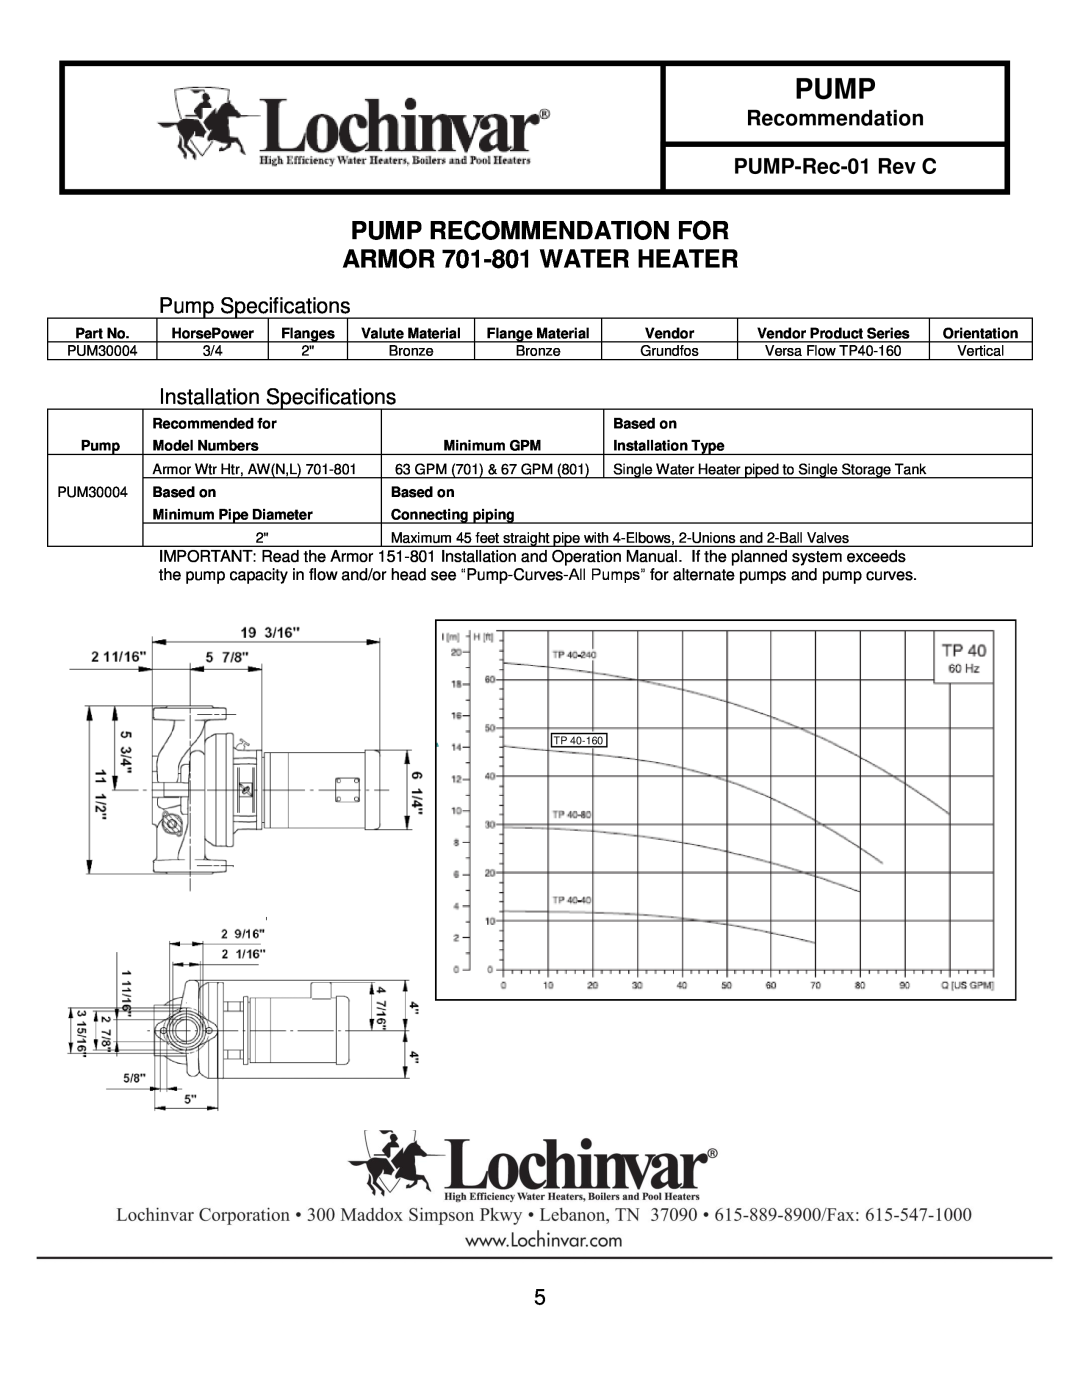 Lochinvar 151-200 ARMOR 701-801WATER HEATER, Pump Recommendation For, Pump Specifications, Installation Specifications 